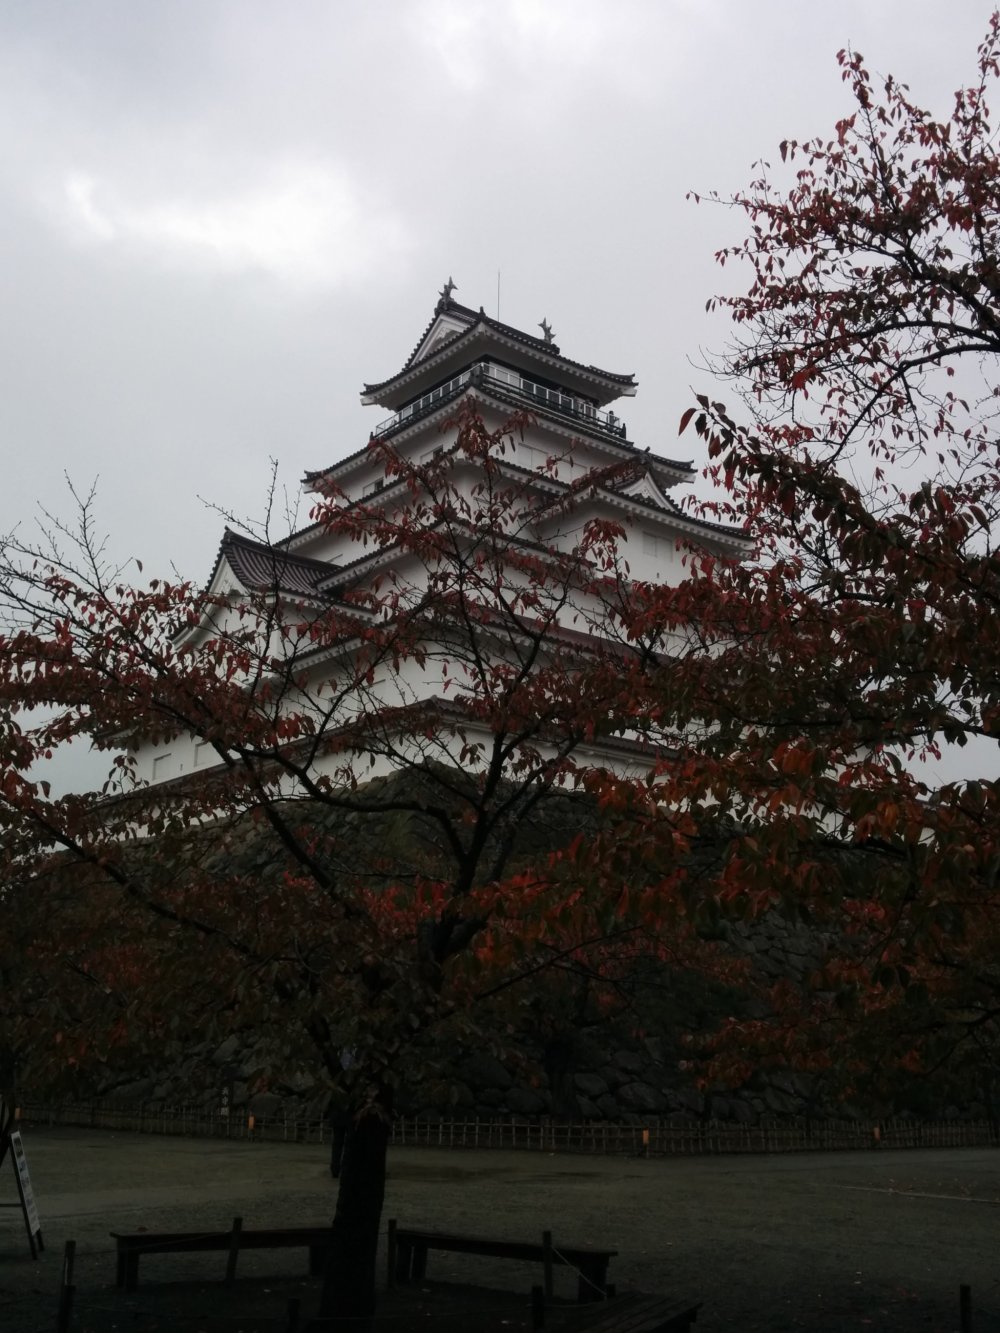 The castle on a rainy day, obscured by red leaves